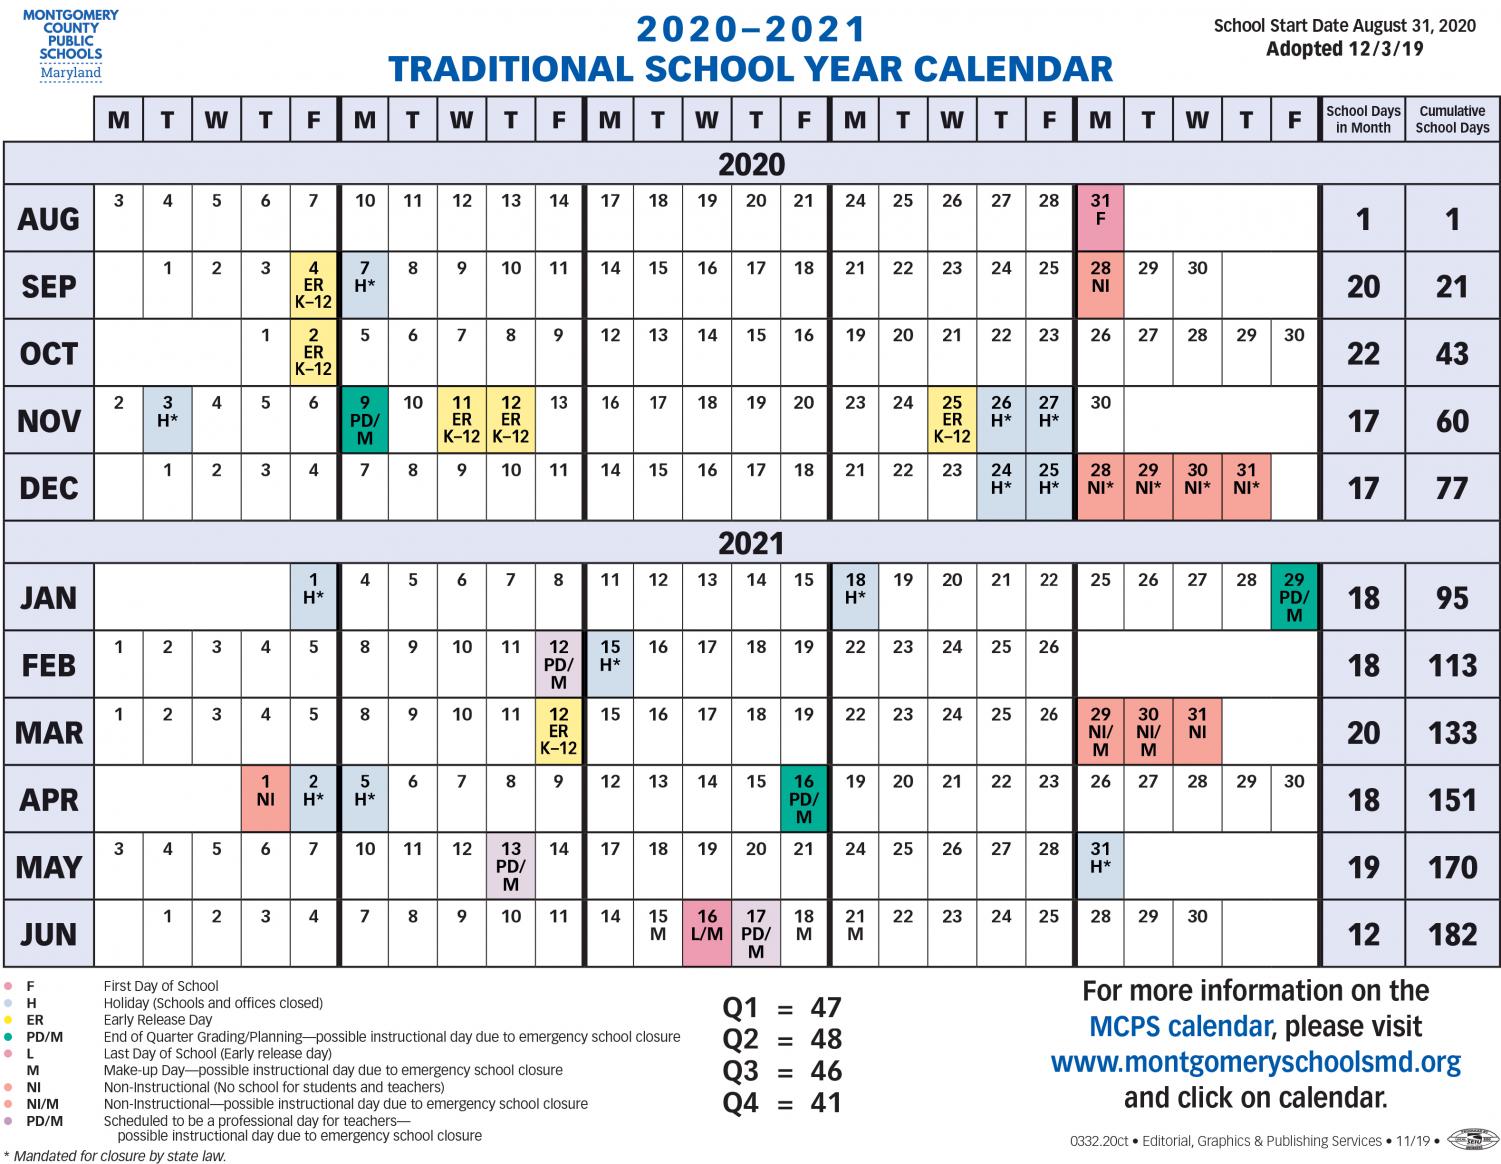 MCPS releases calendar for 20202021 school year The Black and White